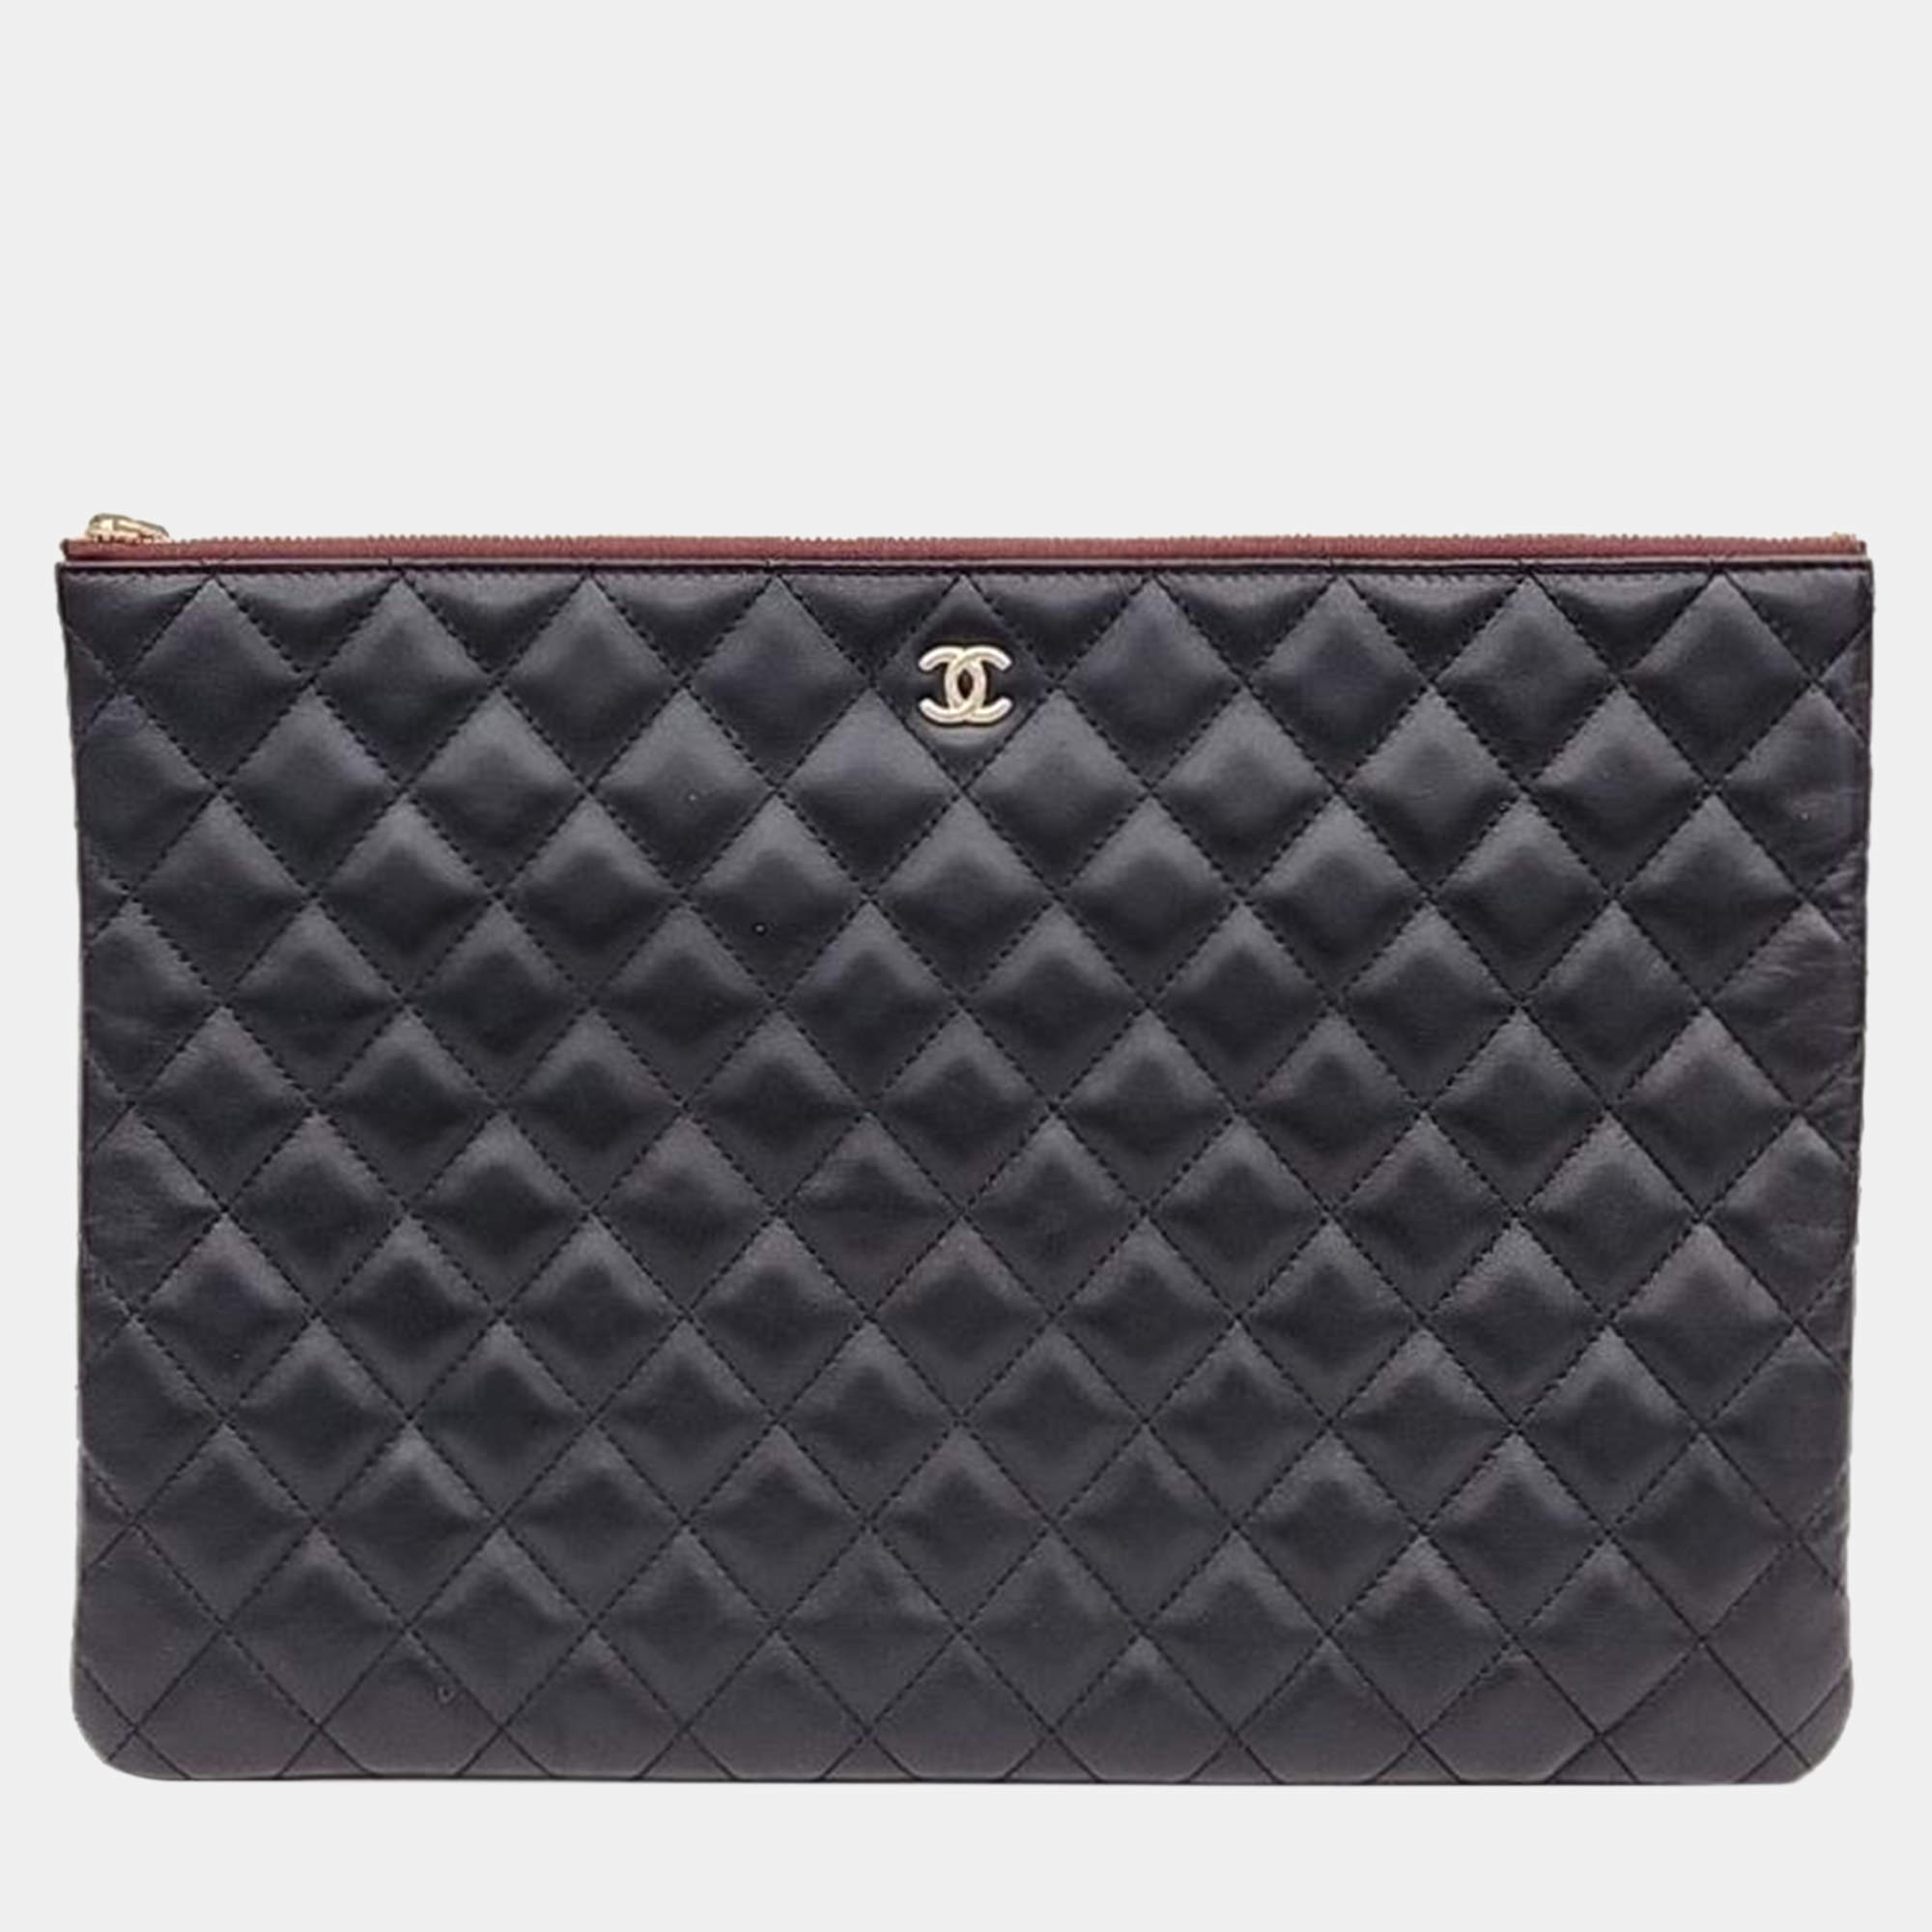 Chanel Black Leather Large Clutch